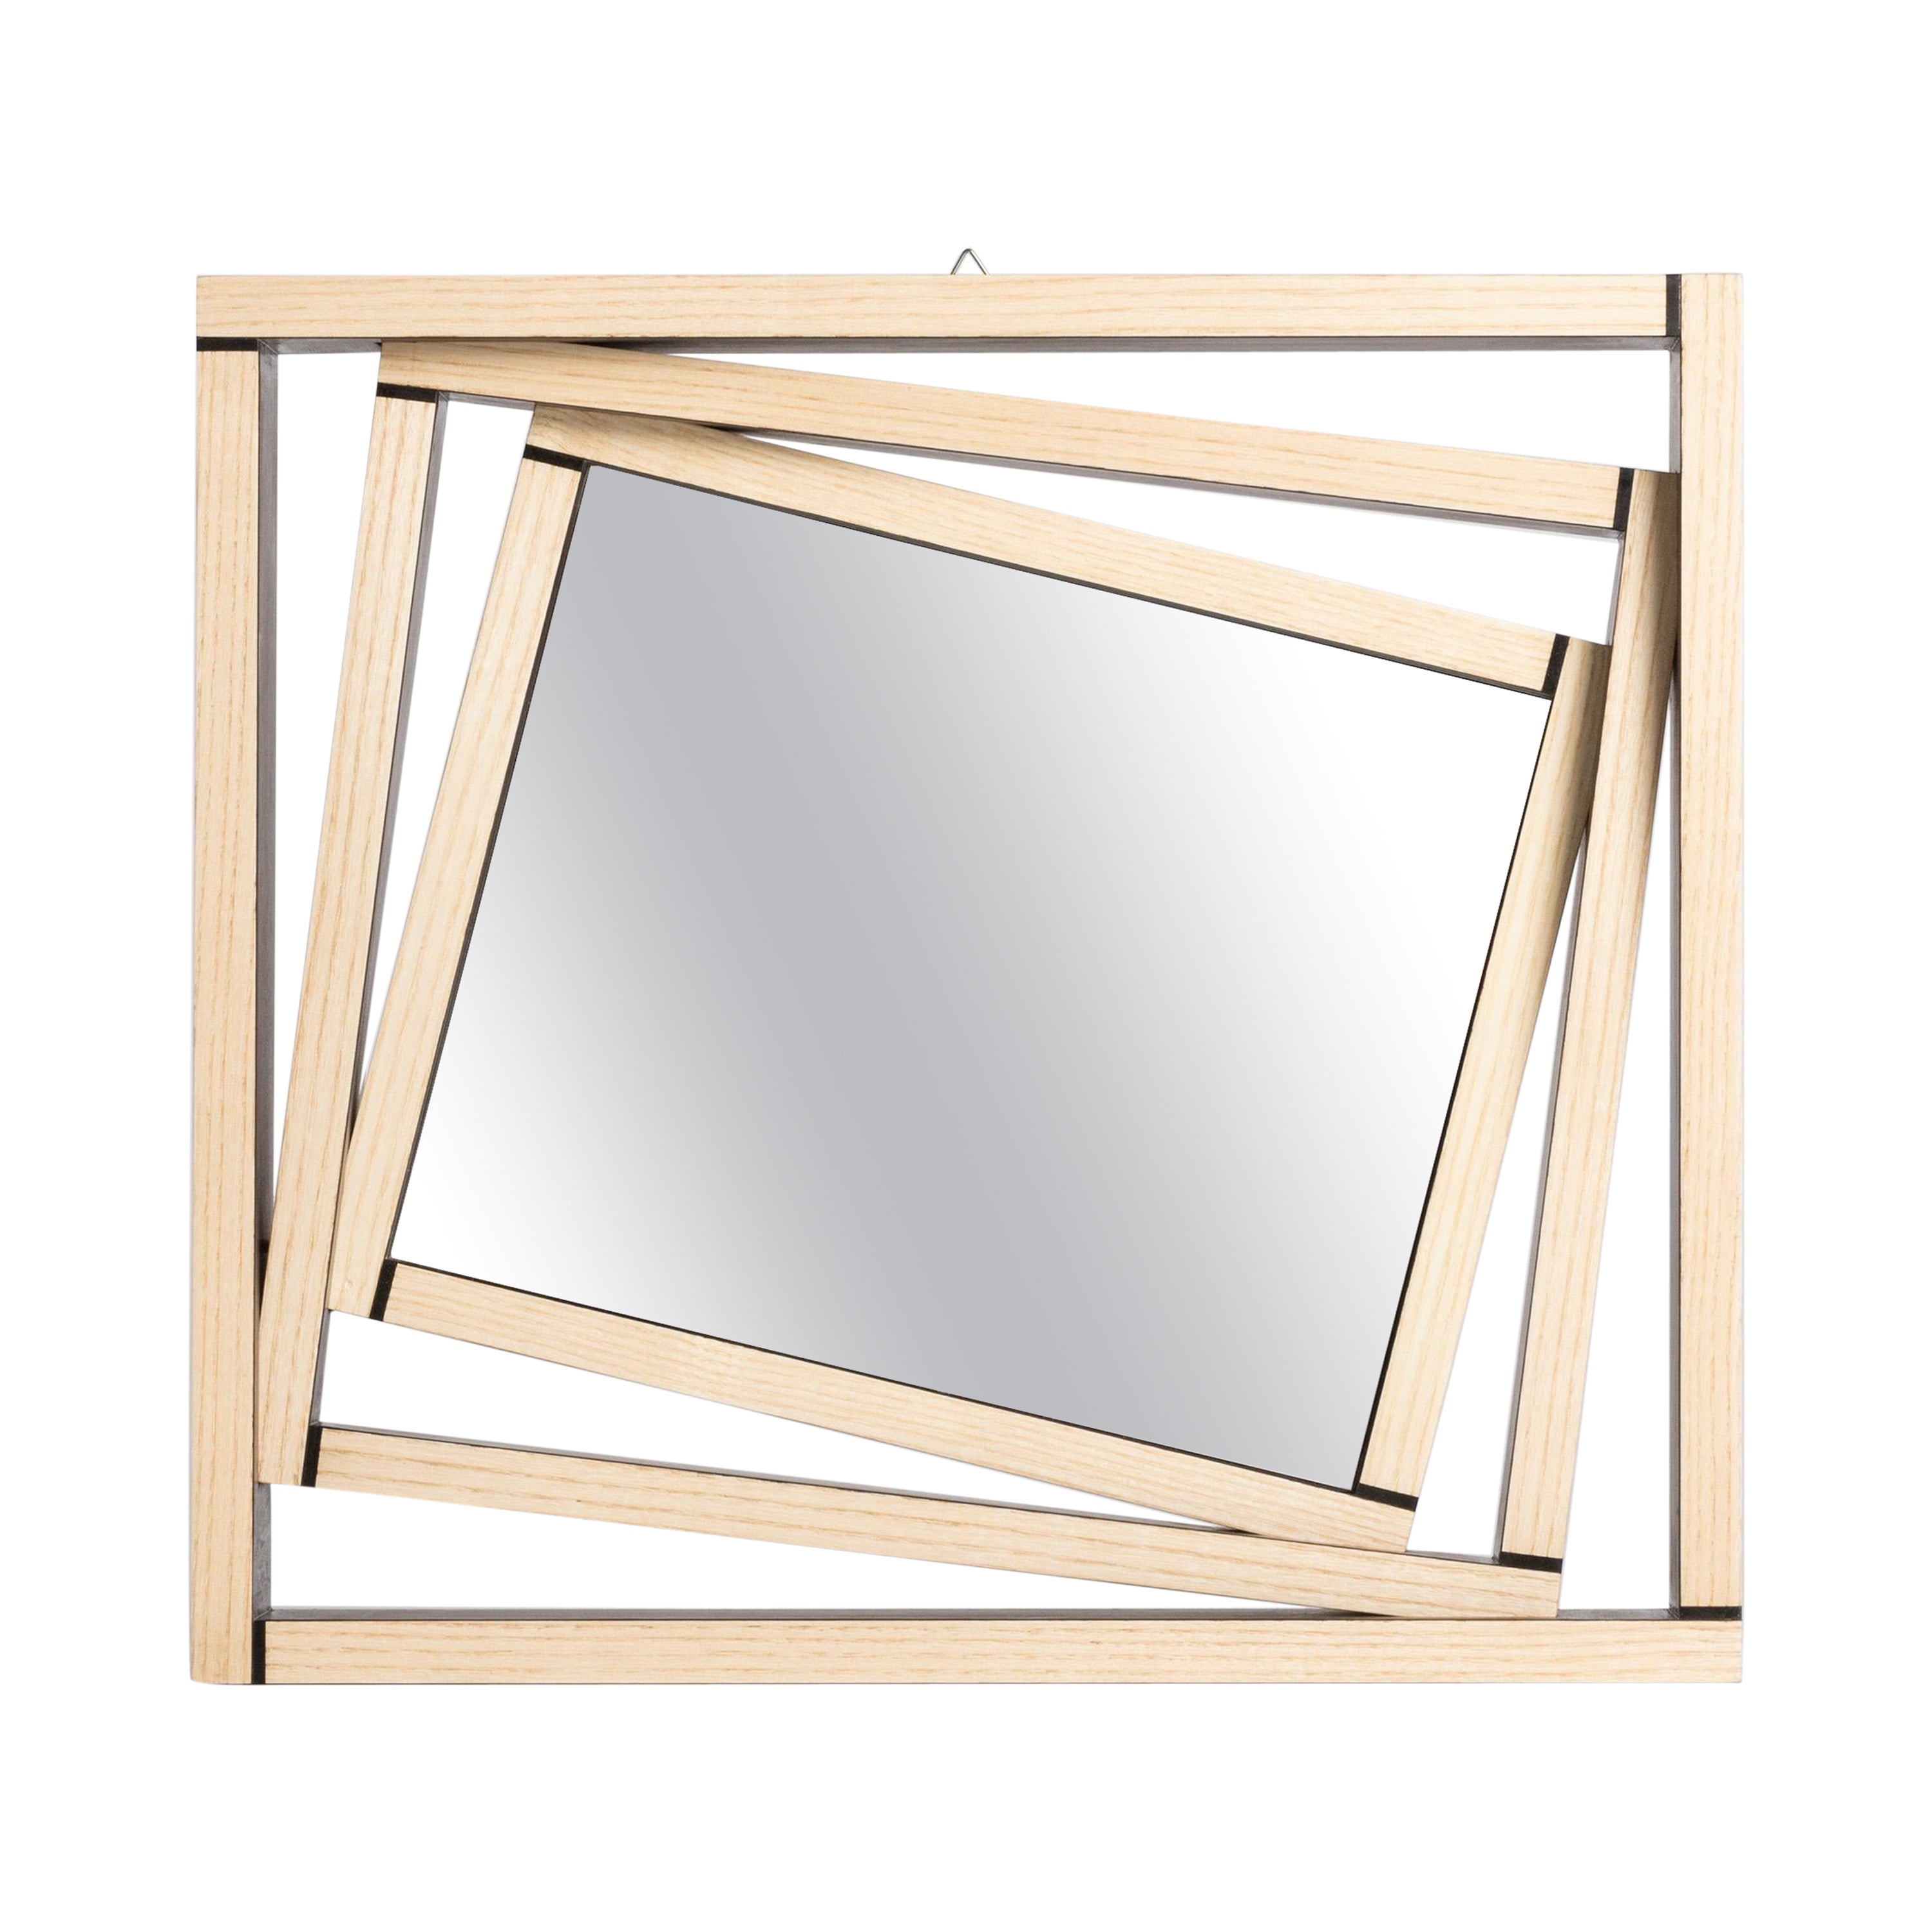 Minimalist Style Mirror with Frame Made of Ash and Ebony by Giordano Vigano For Sale